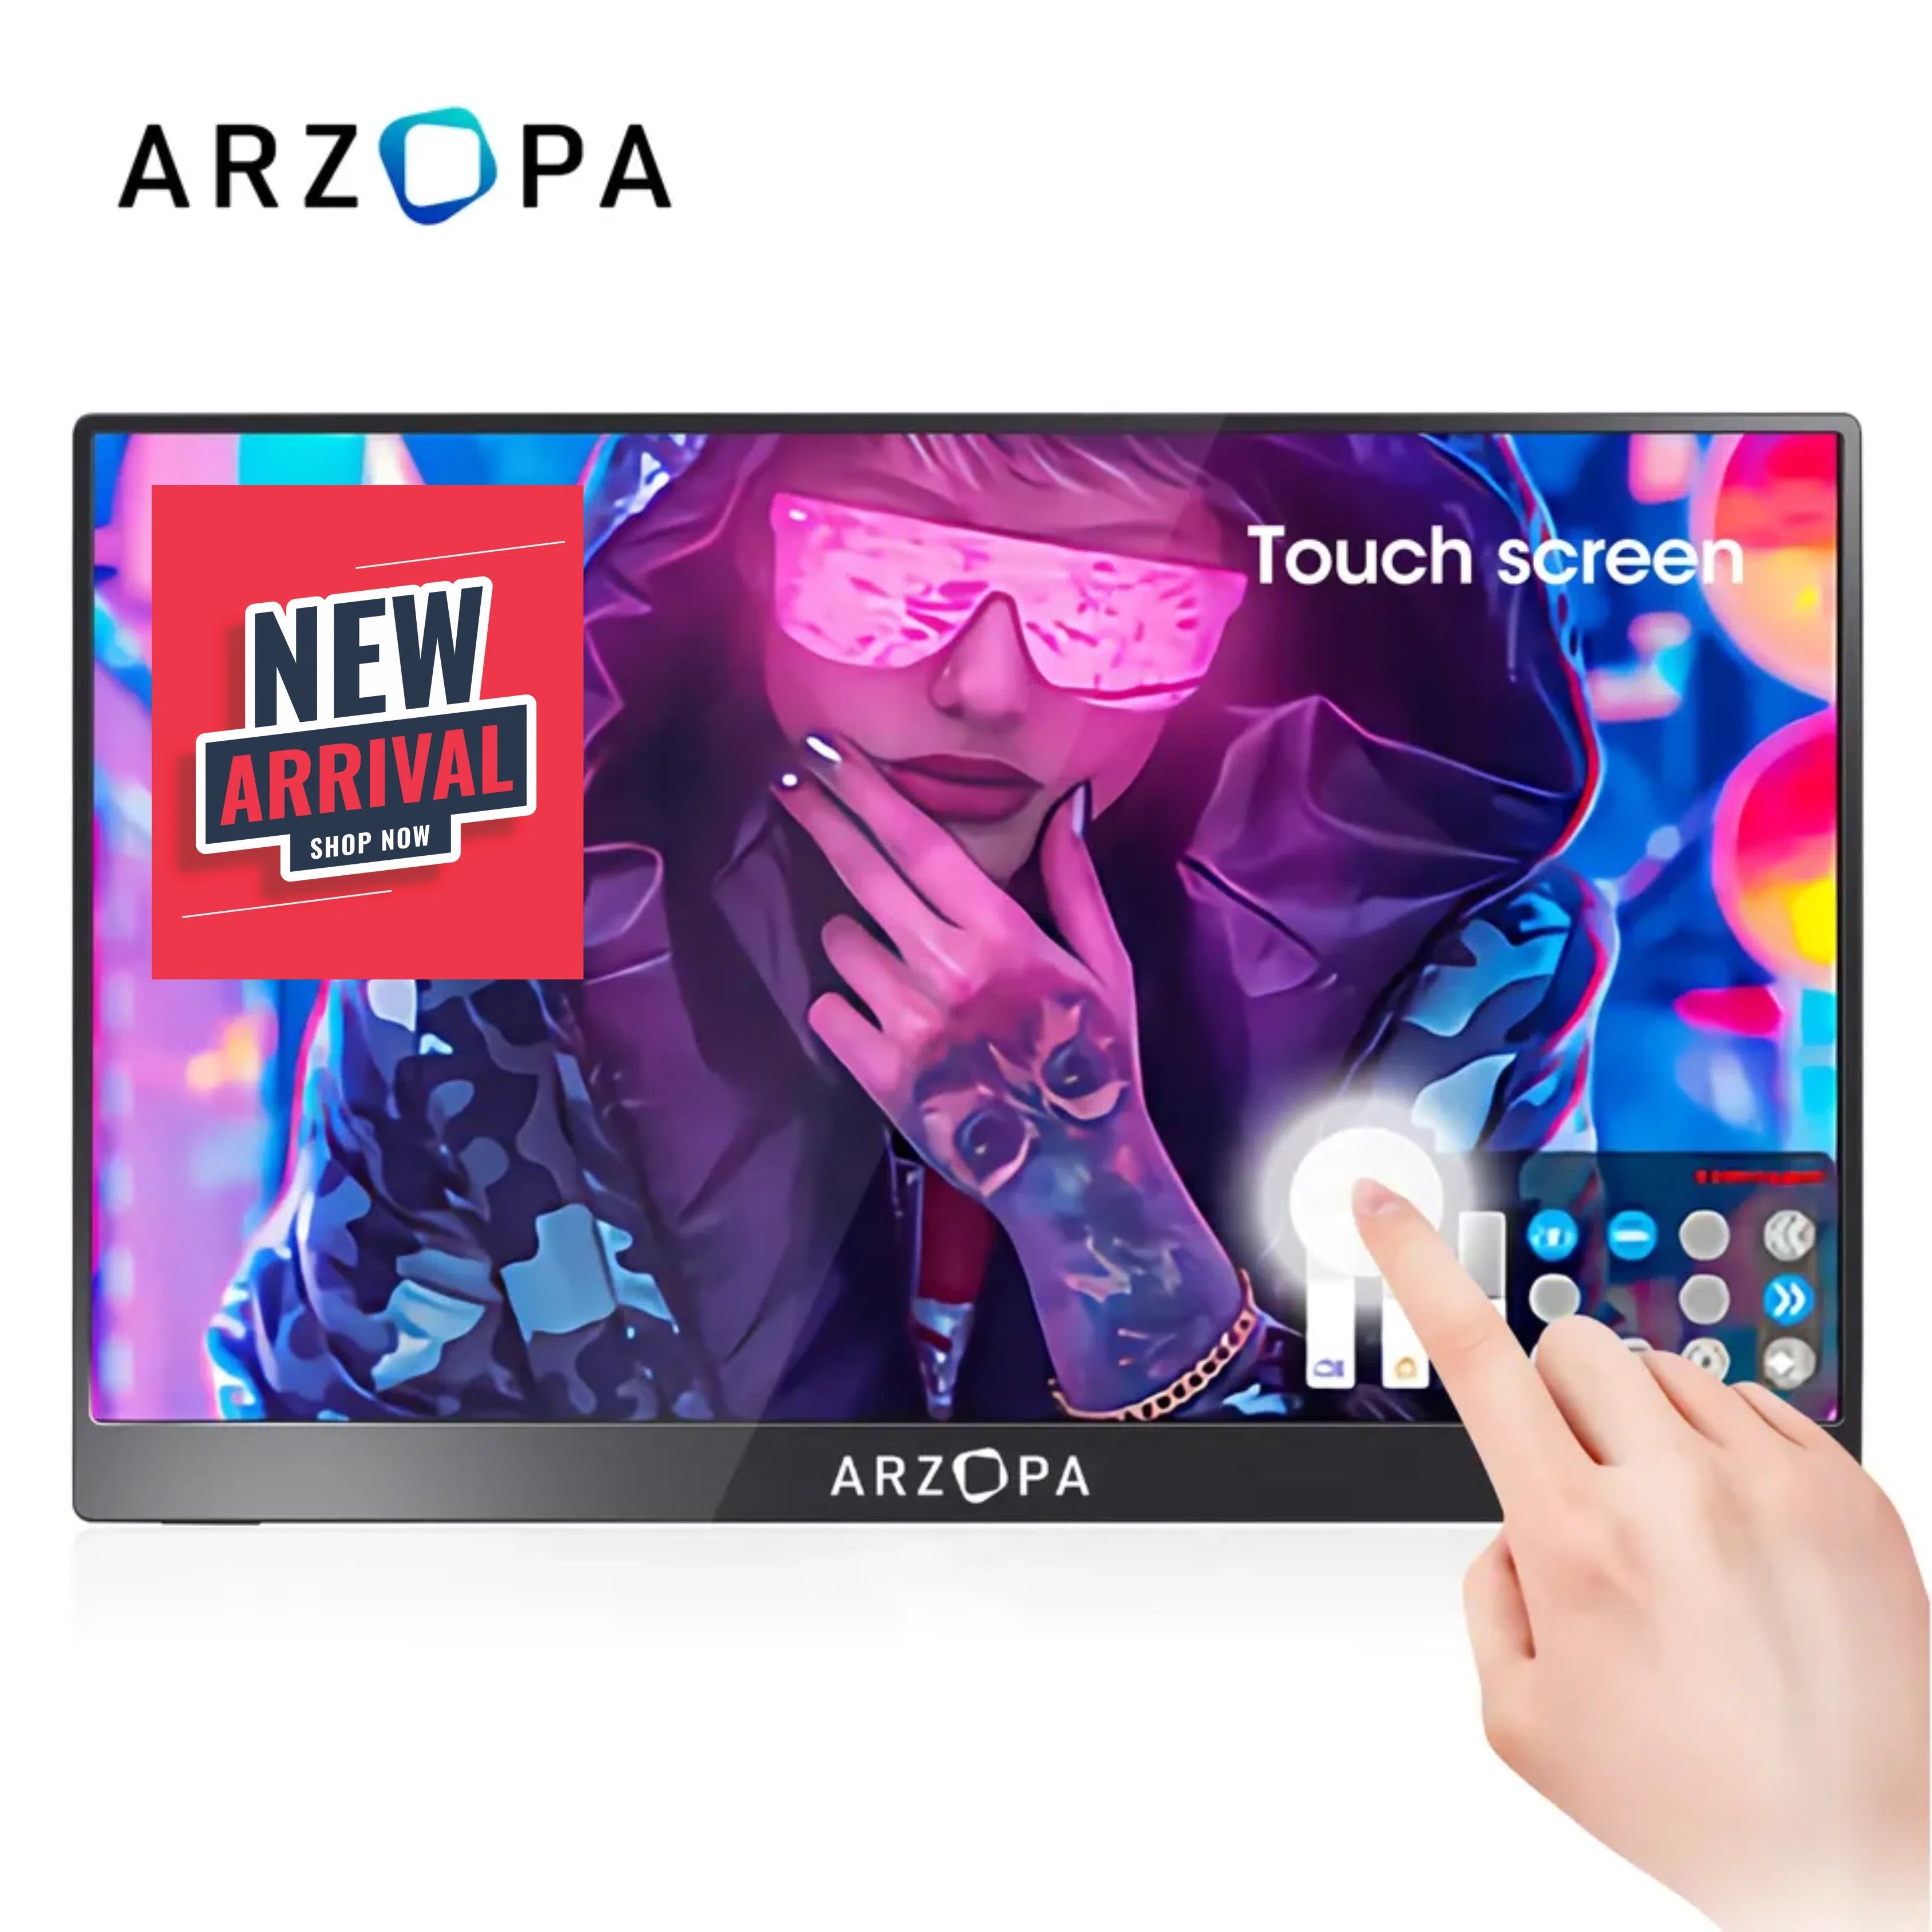 Hight quality portable screen for streaming, gaming or even WORKING 😳, arzopa portable monitor